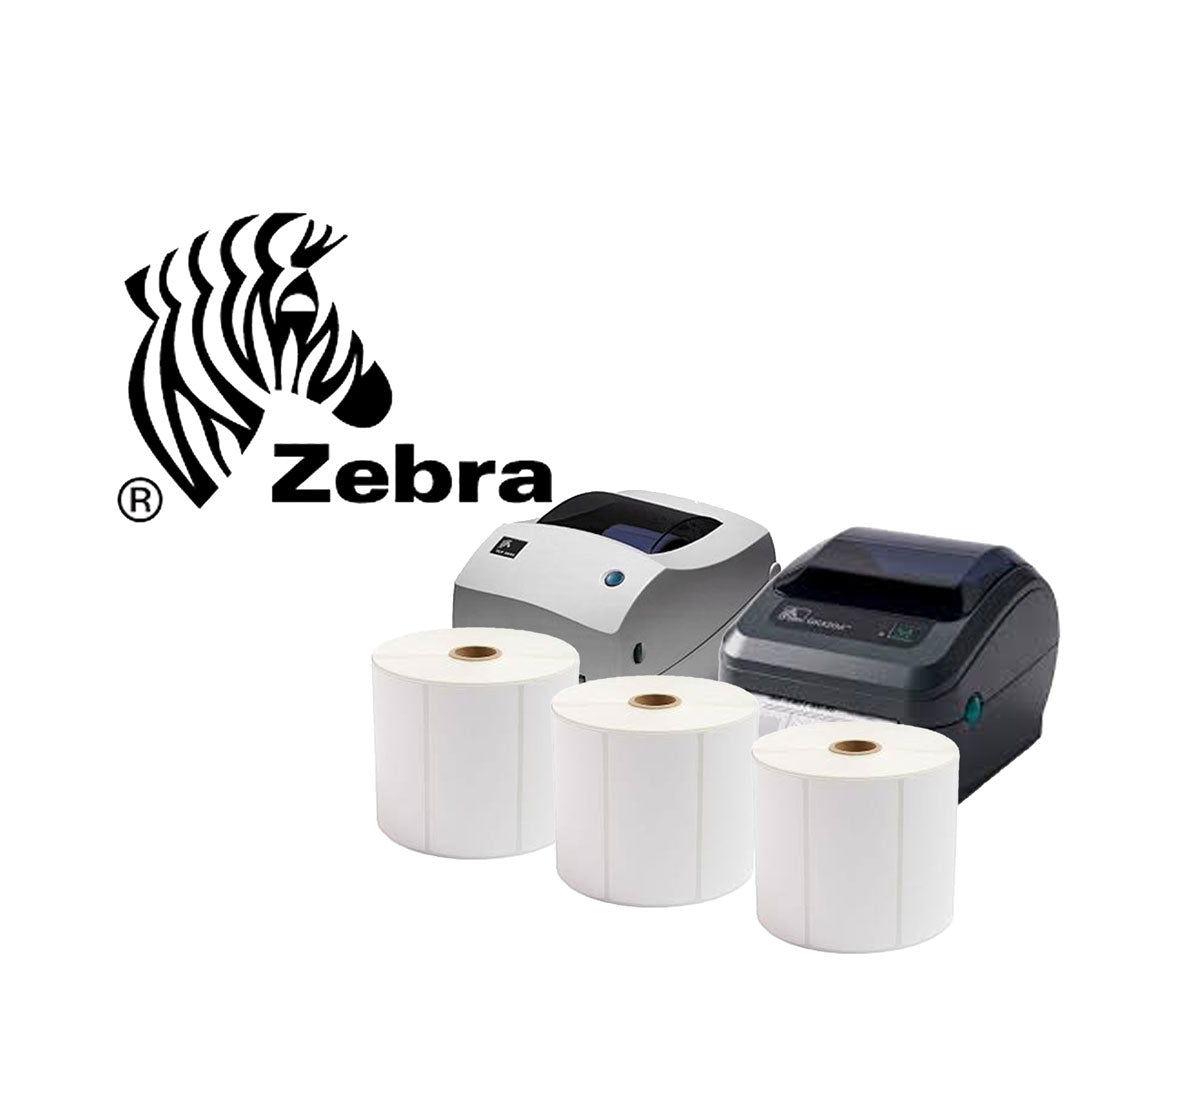 Zebra Printer - Labels and Tags